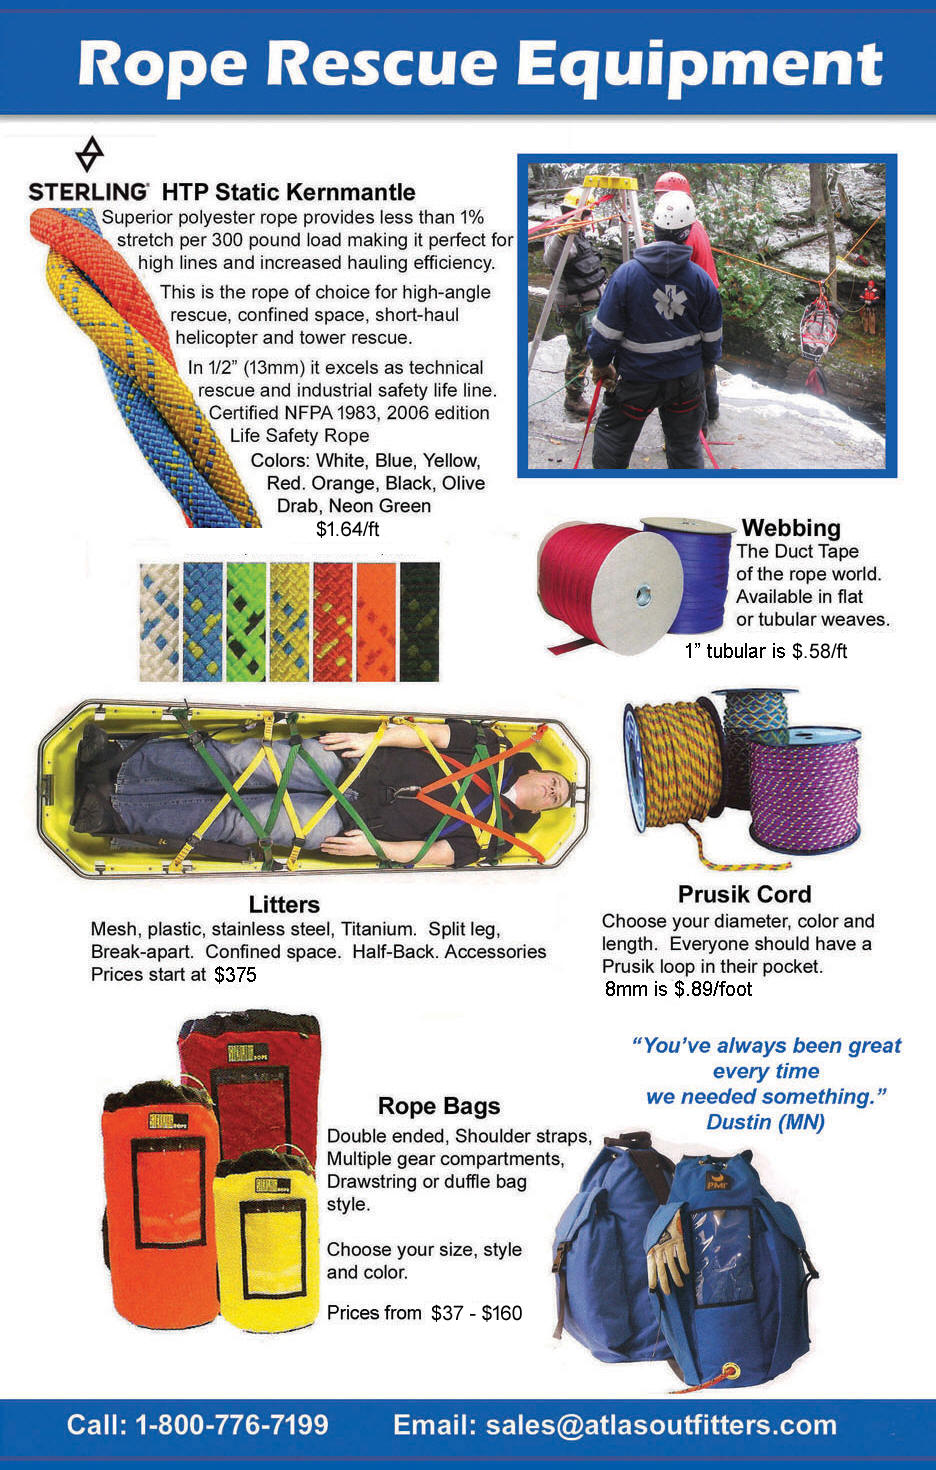 Certified Rescue Rope and accessories